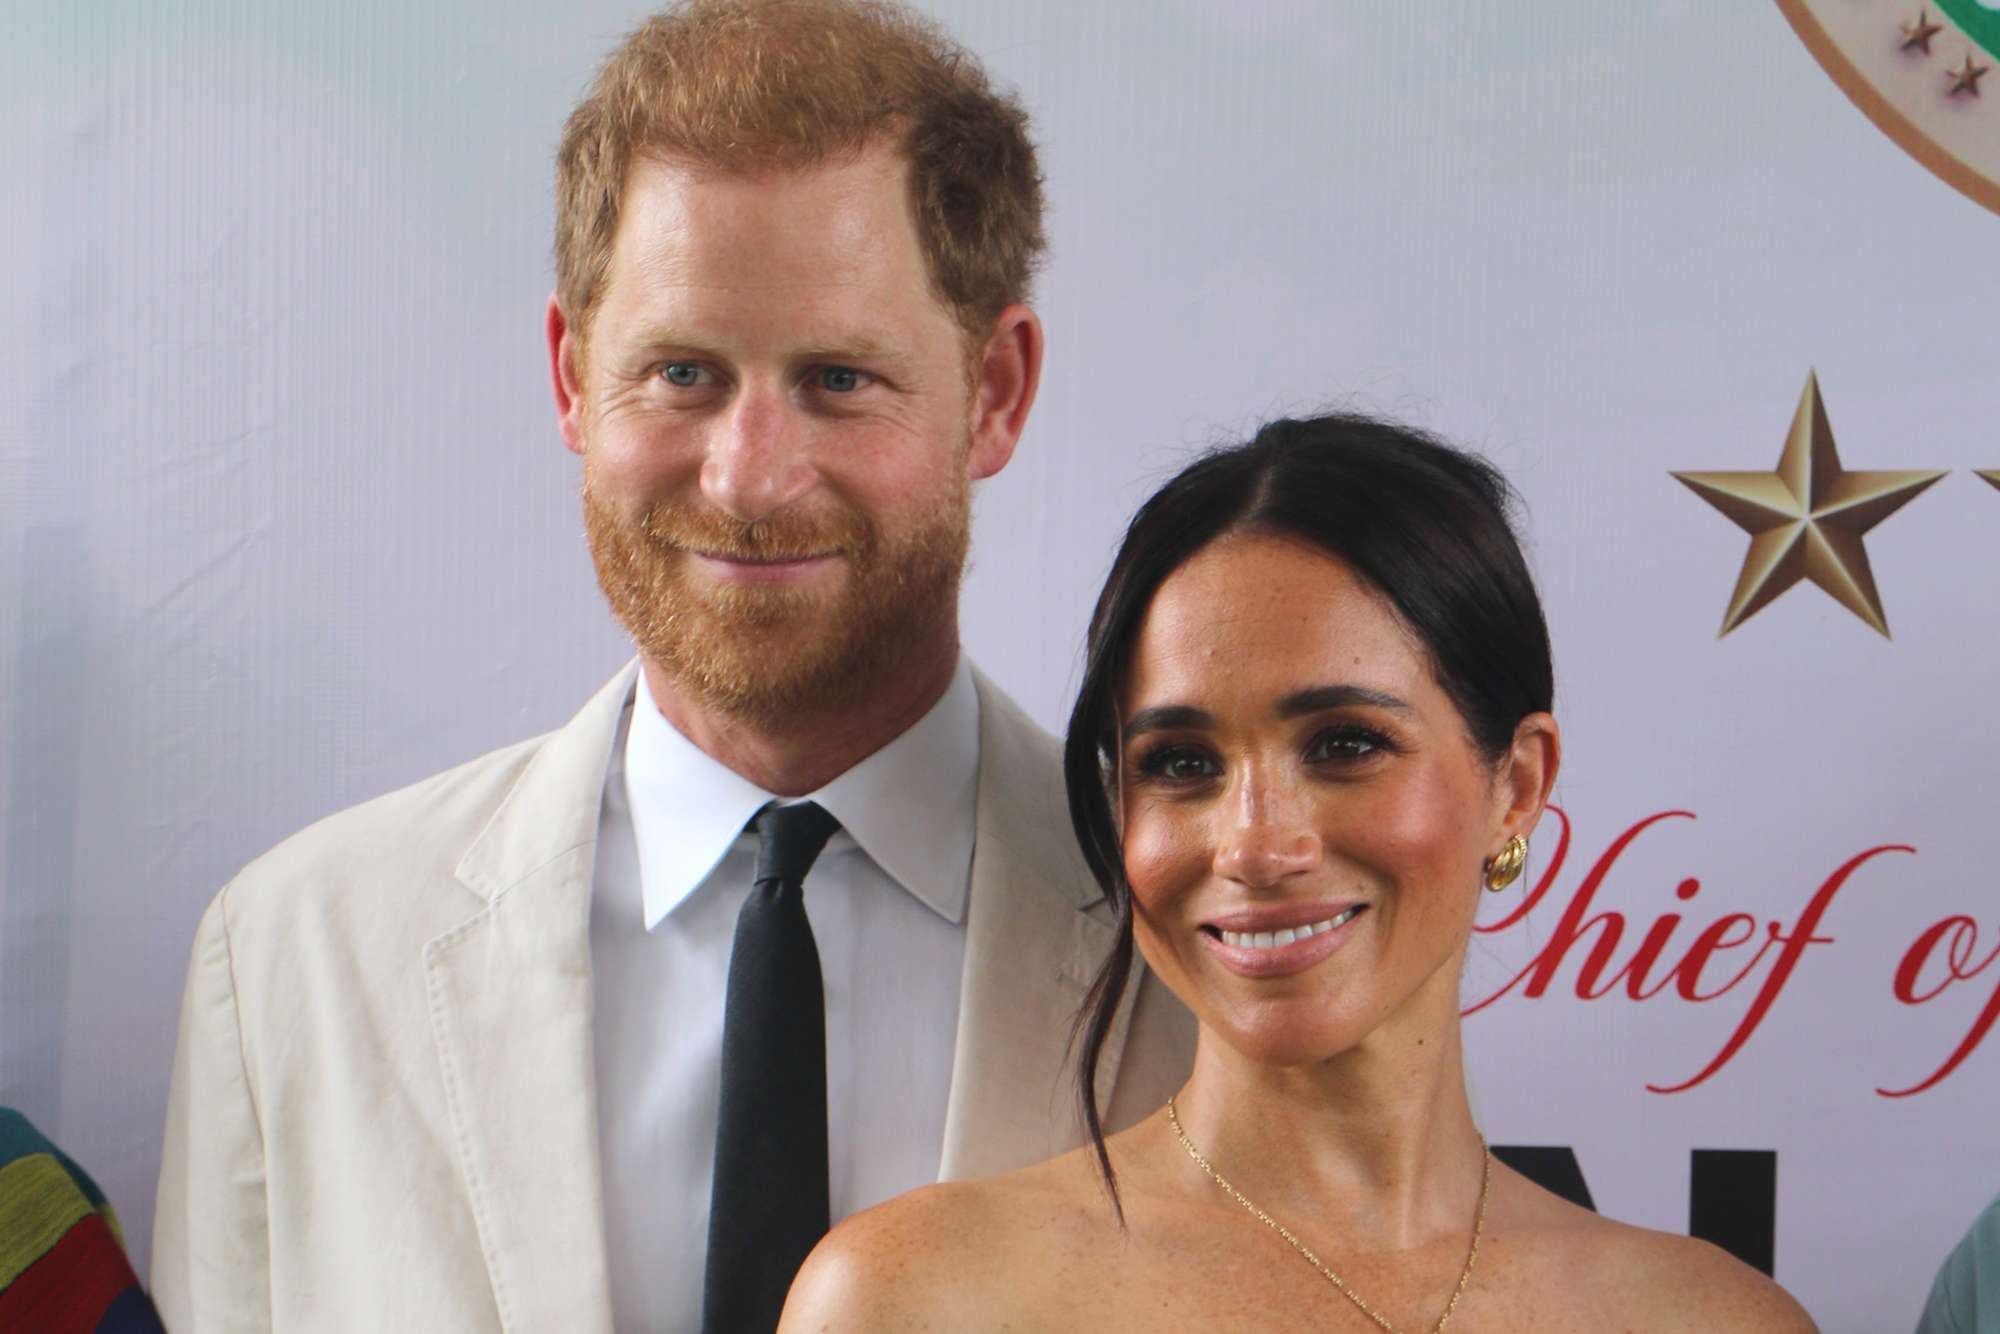 Meghan Markle Recalls Her “Suits” Days, Life Before Prince Harry and How Everything Had a 'Plot Twist'